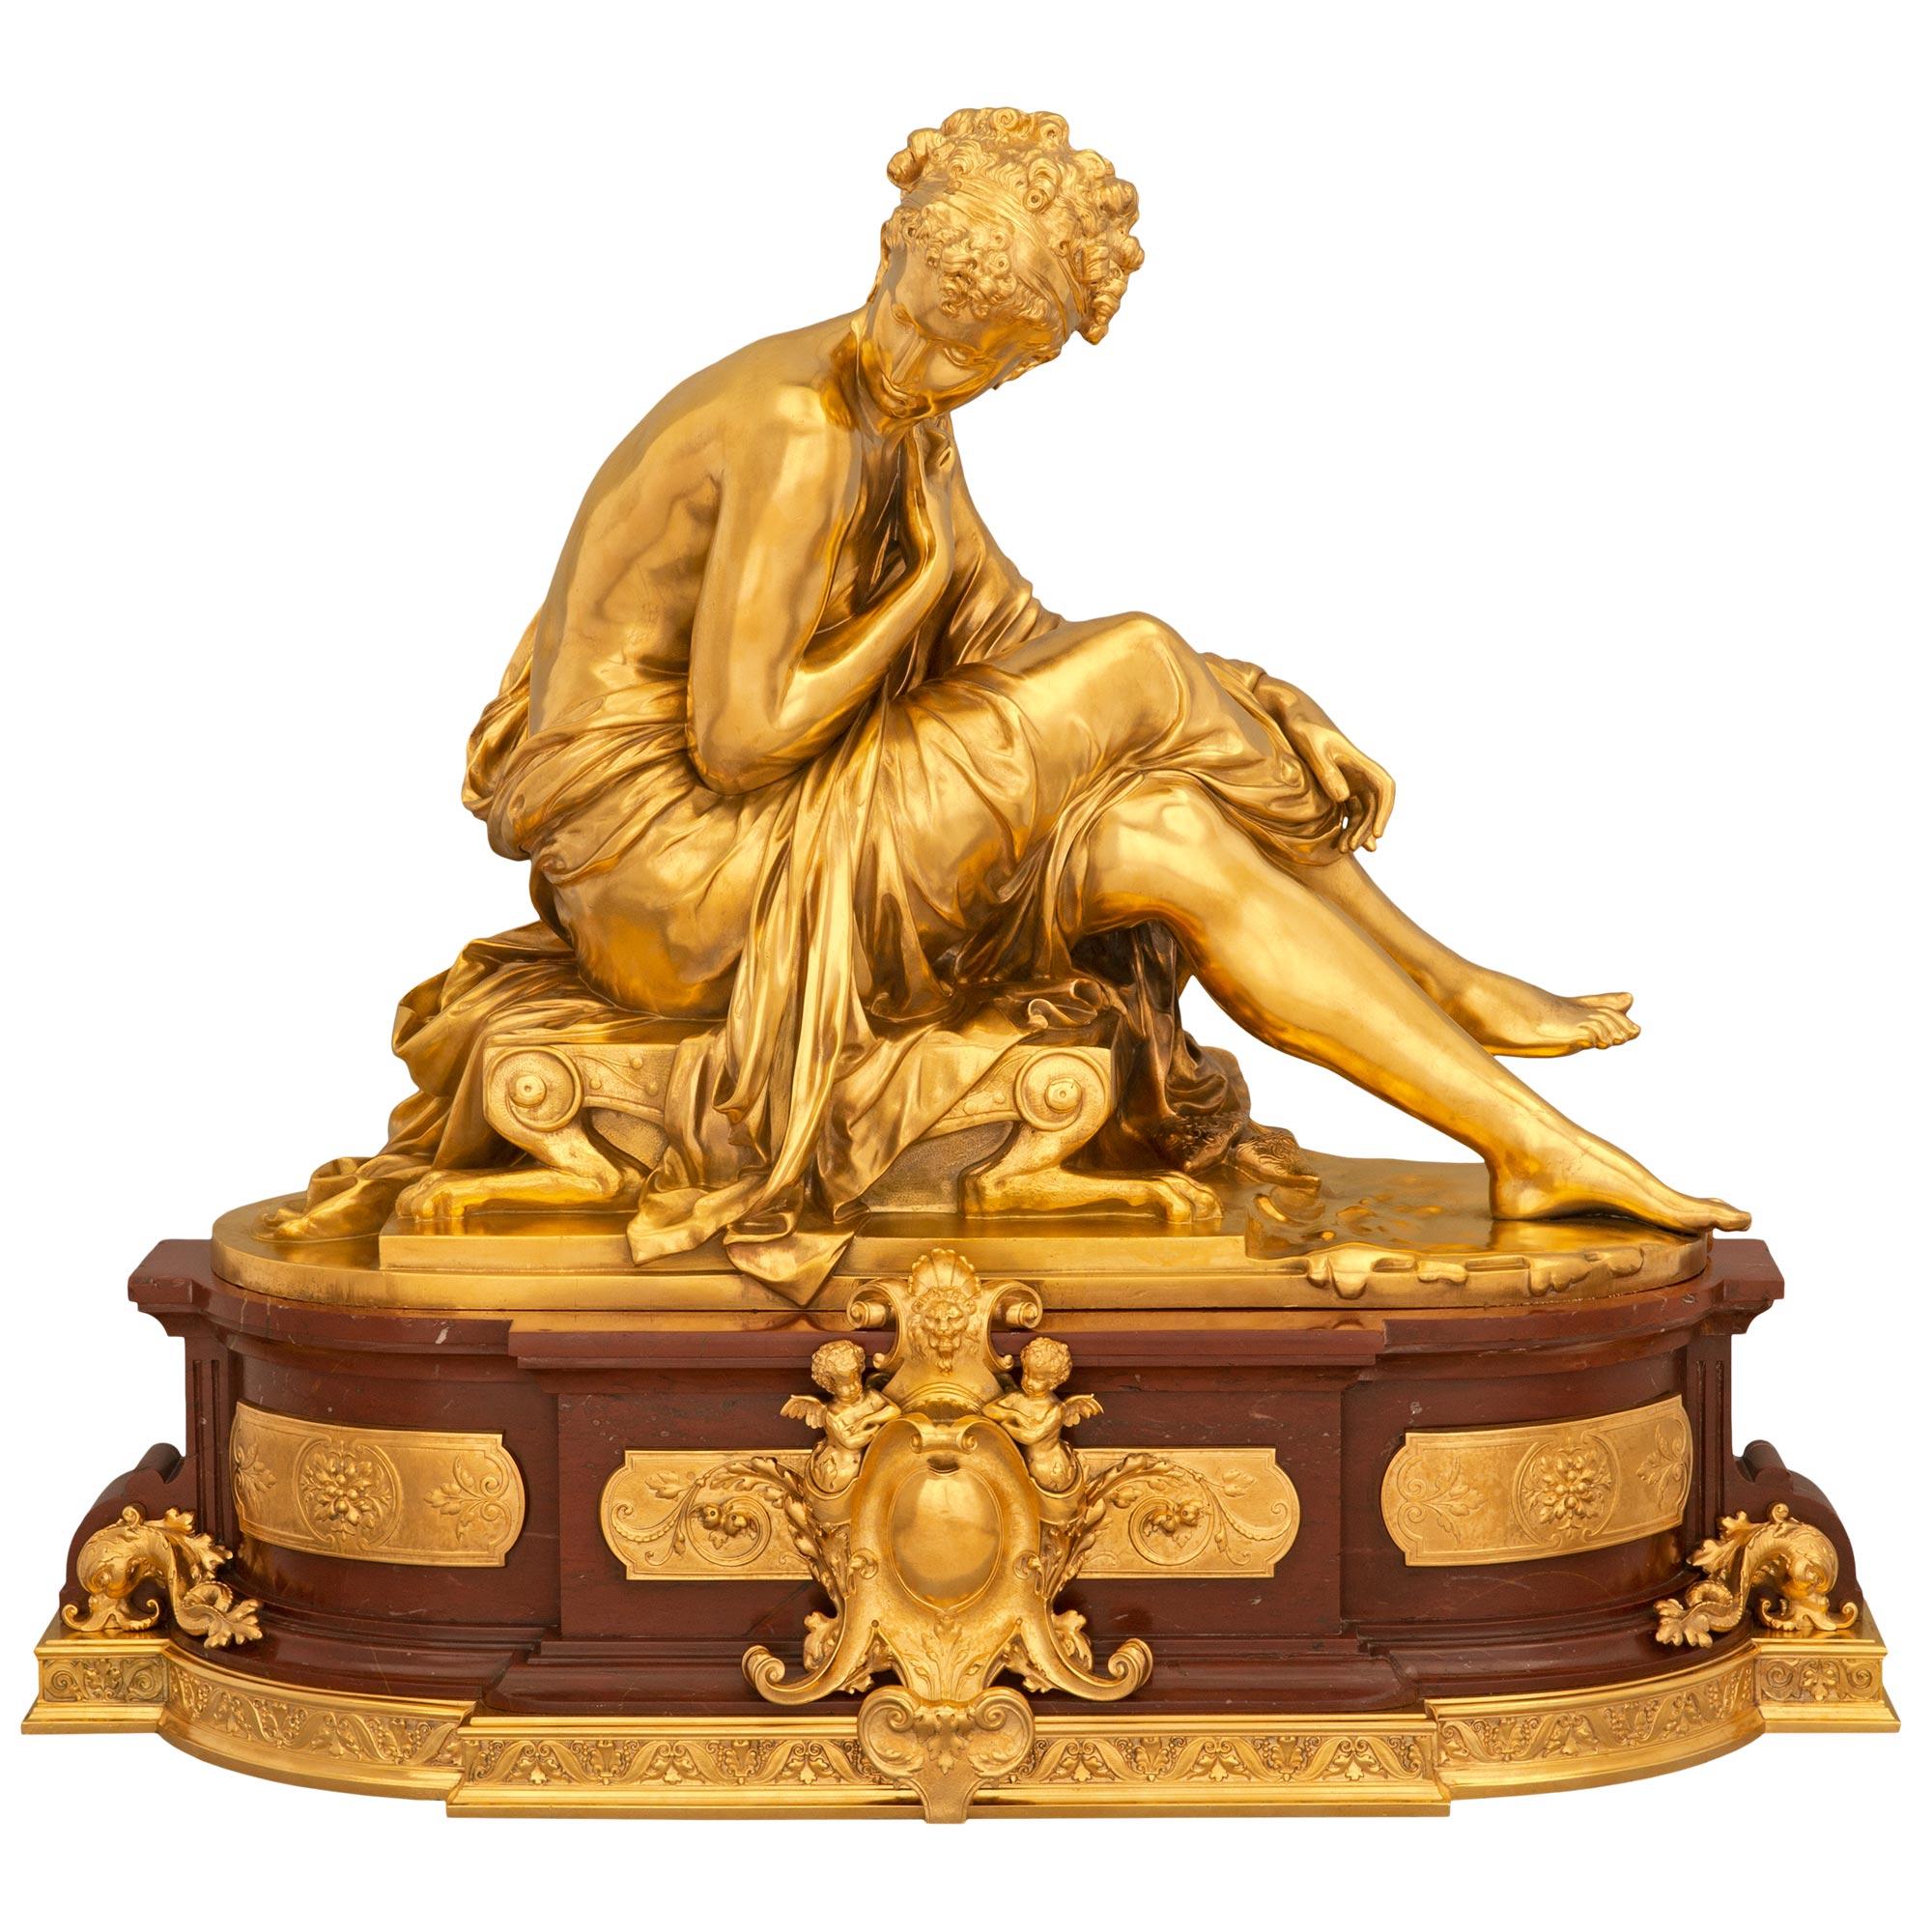 A stunning and very high quality French 19th century Louis XVI st. Rouge Griotte marble and ormolu statue signed Moreau. The statue is raised on its original most impressive oblong shaped Rouge Griotte marble base with an exquisite bottom mottled